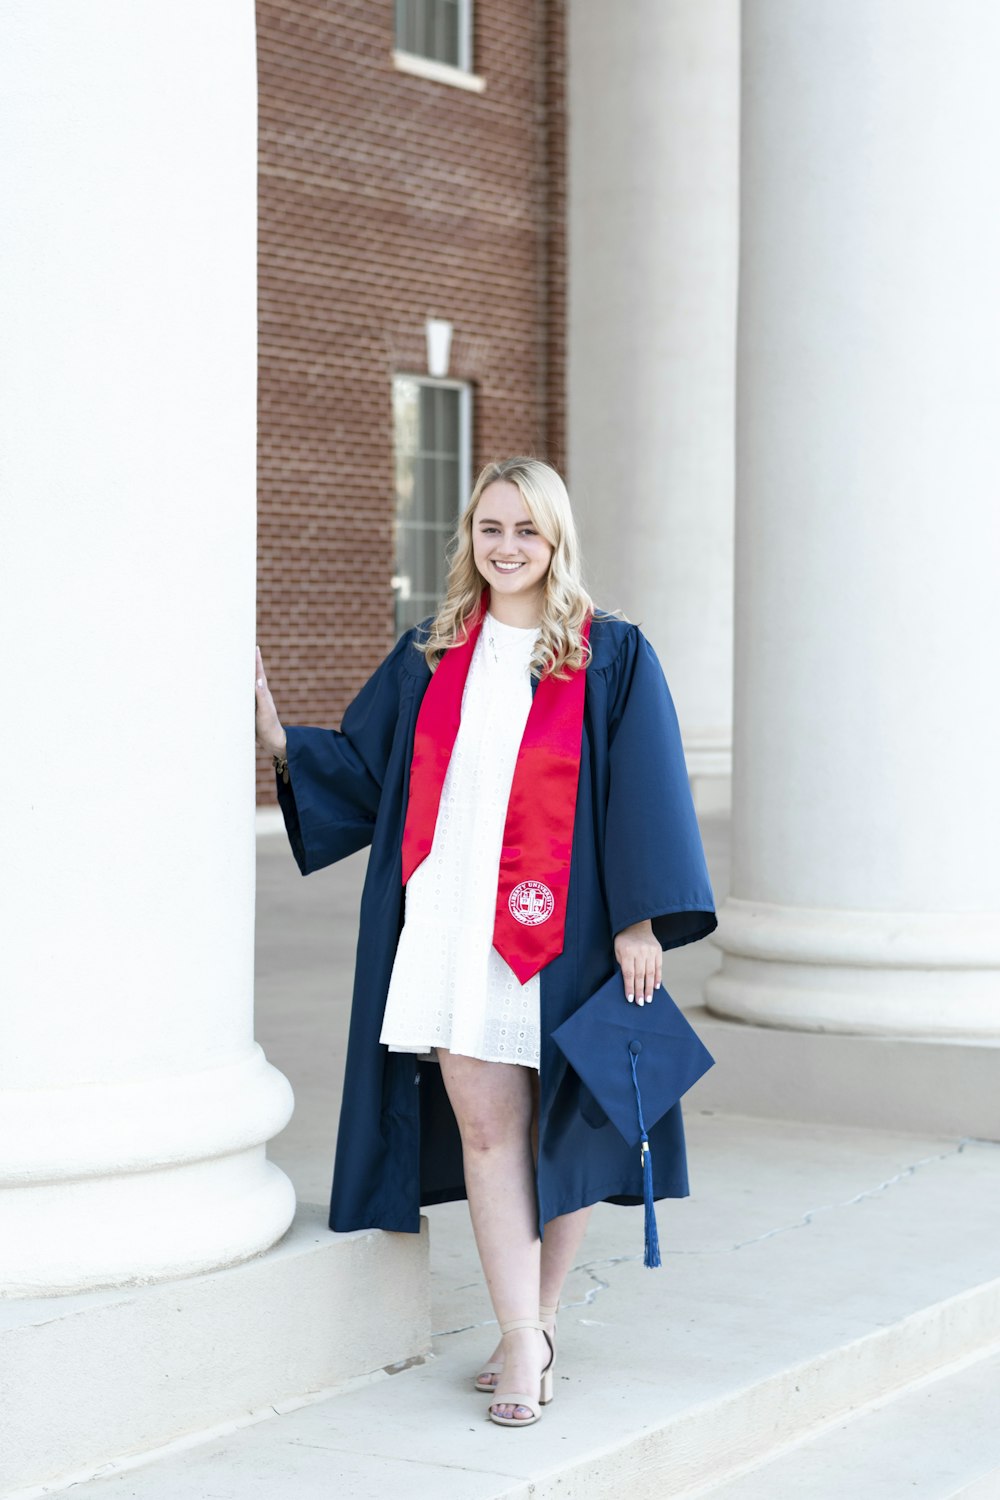 a woman in a graduation gown is standing on the steps of a building